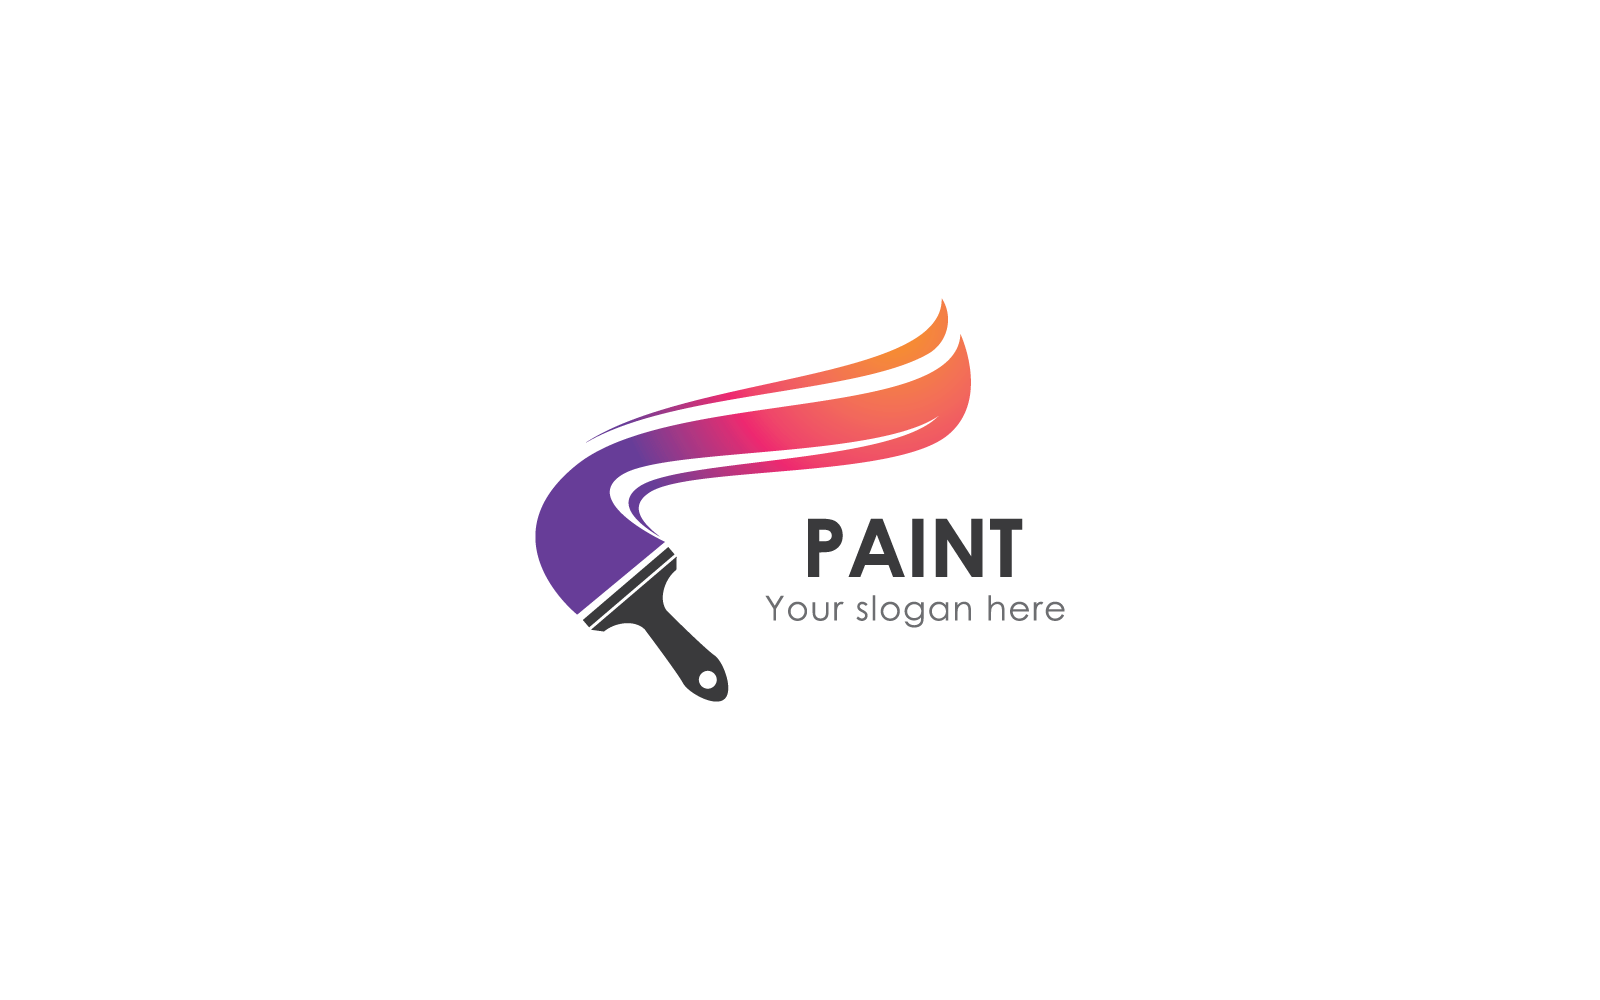 Paint House logo illustration icon business vector template